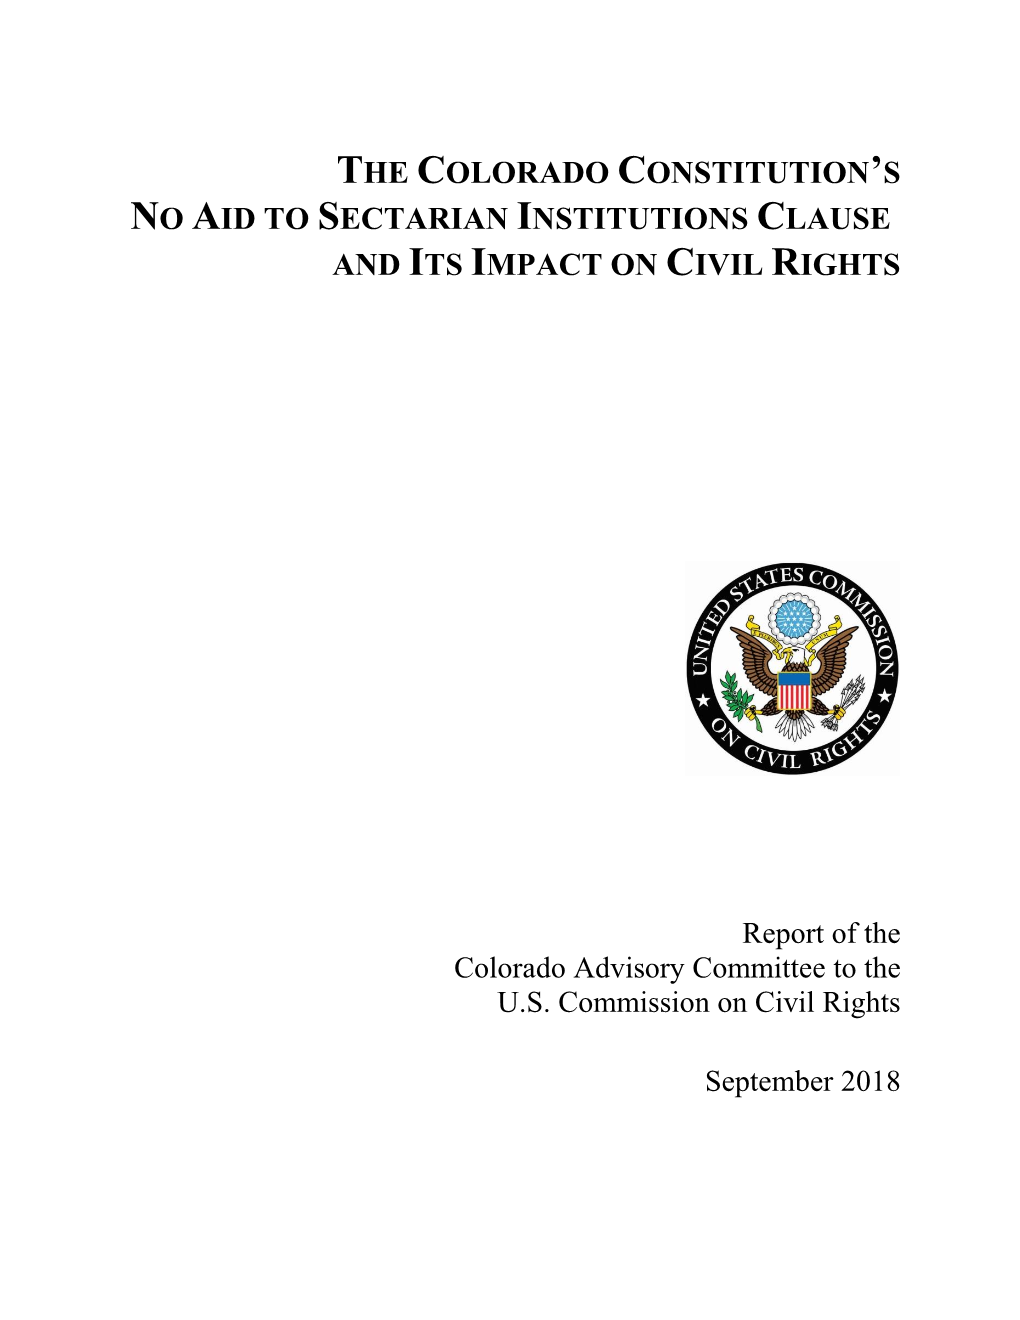 Colorado Constitution's No Aid to Sectarian Institutions Clause